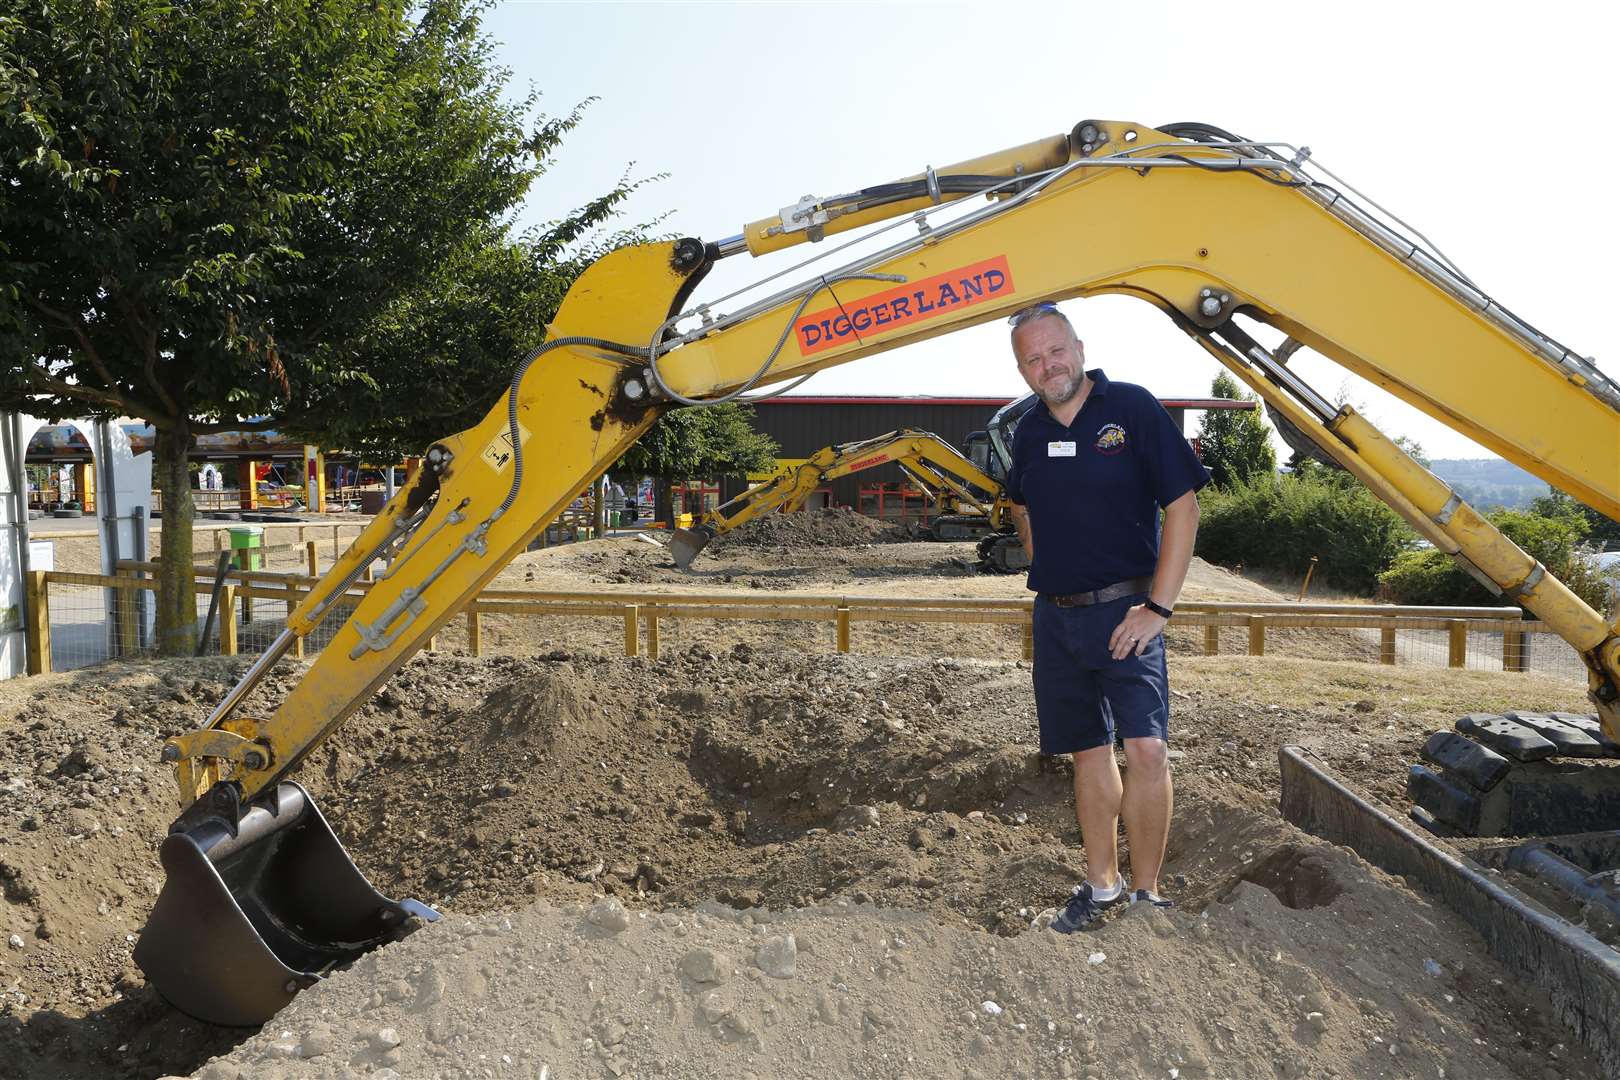 Diggerland's Steve Biggs with one of the attractions, from 2018. Picture: Andy Jones